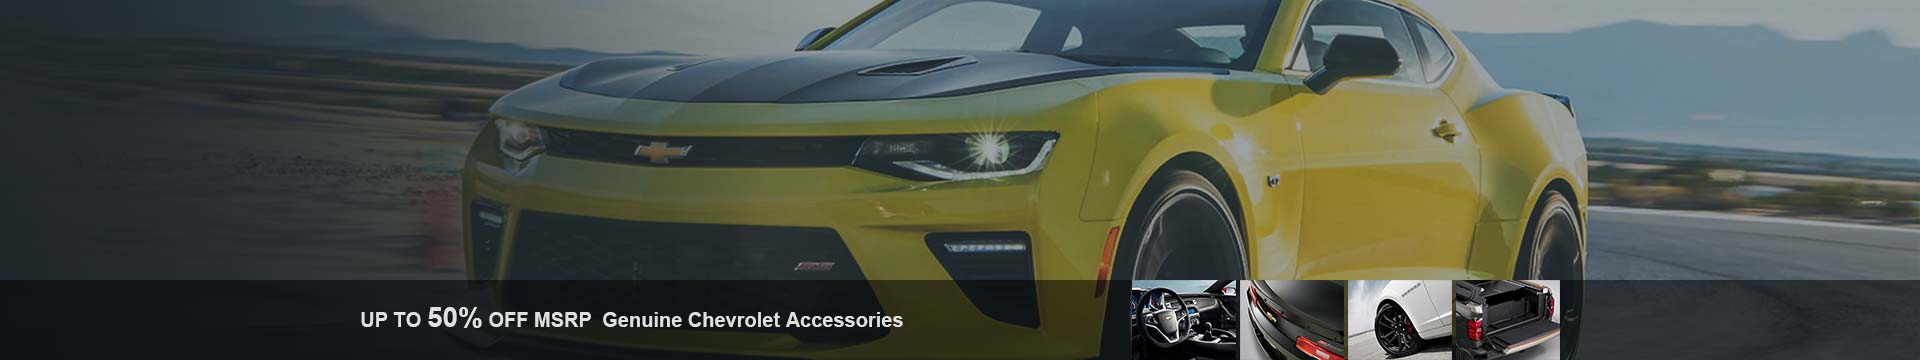 Shop Chevrolet Camaro accessories with lowest prices